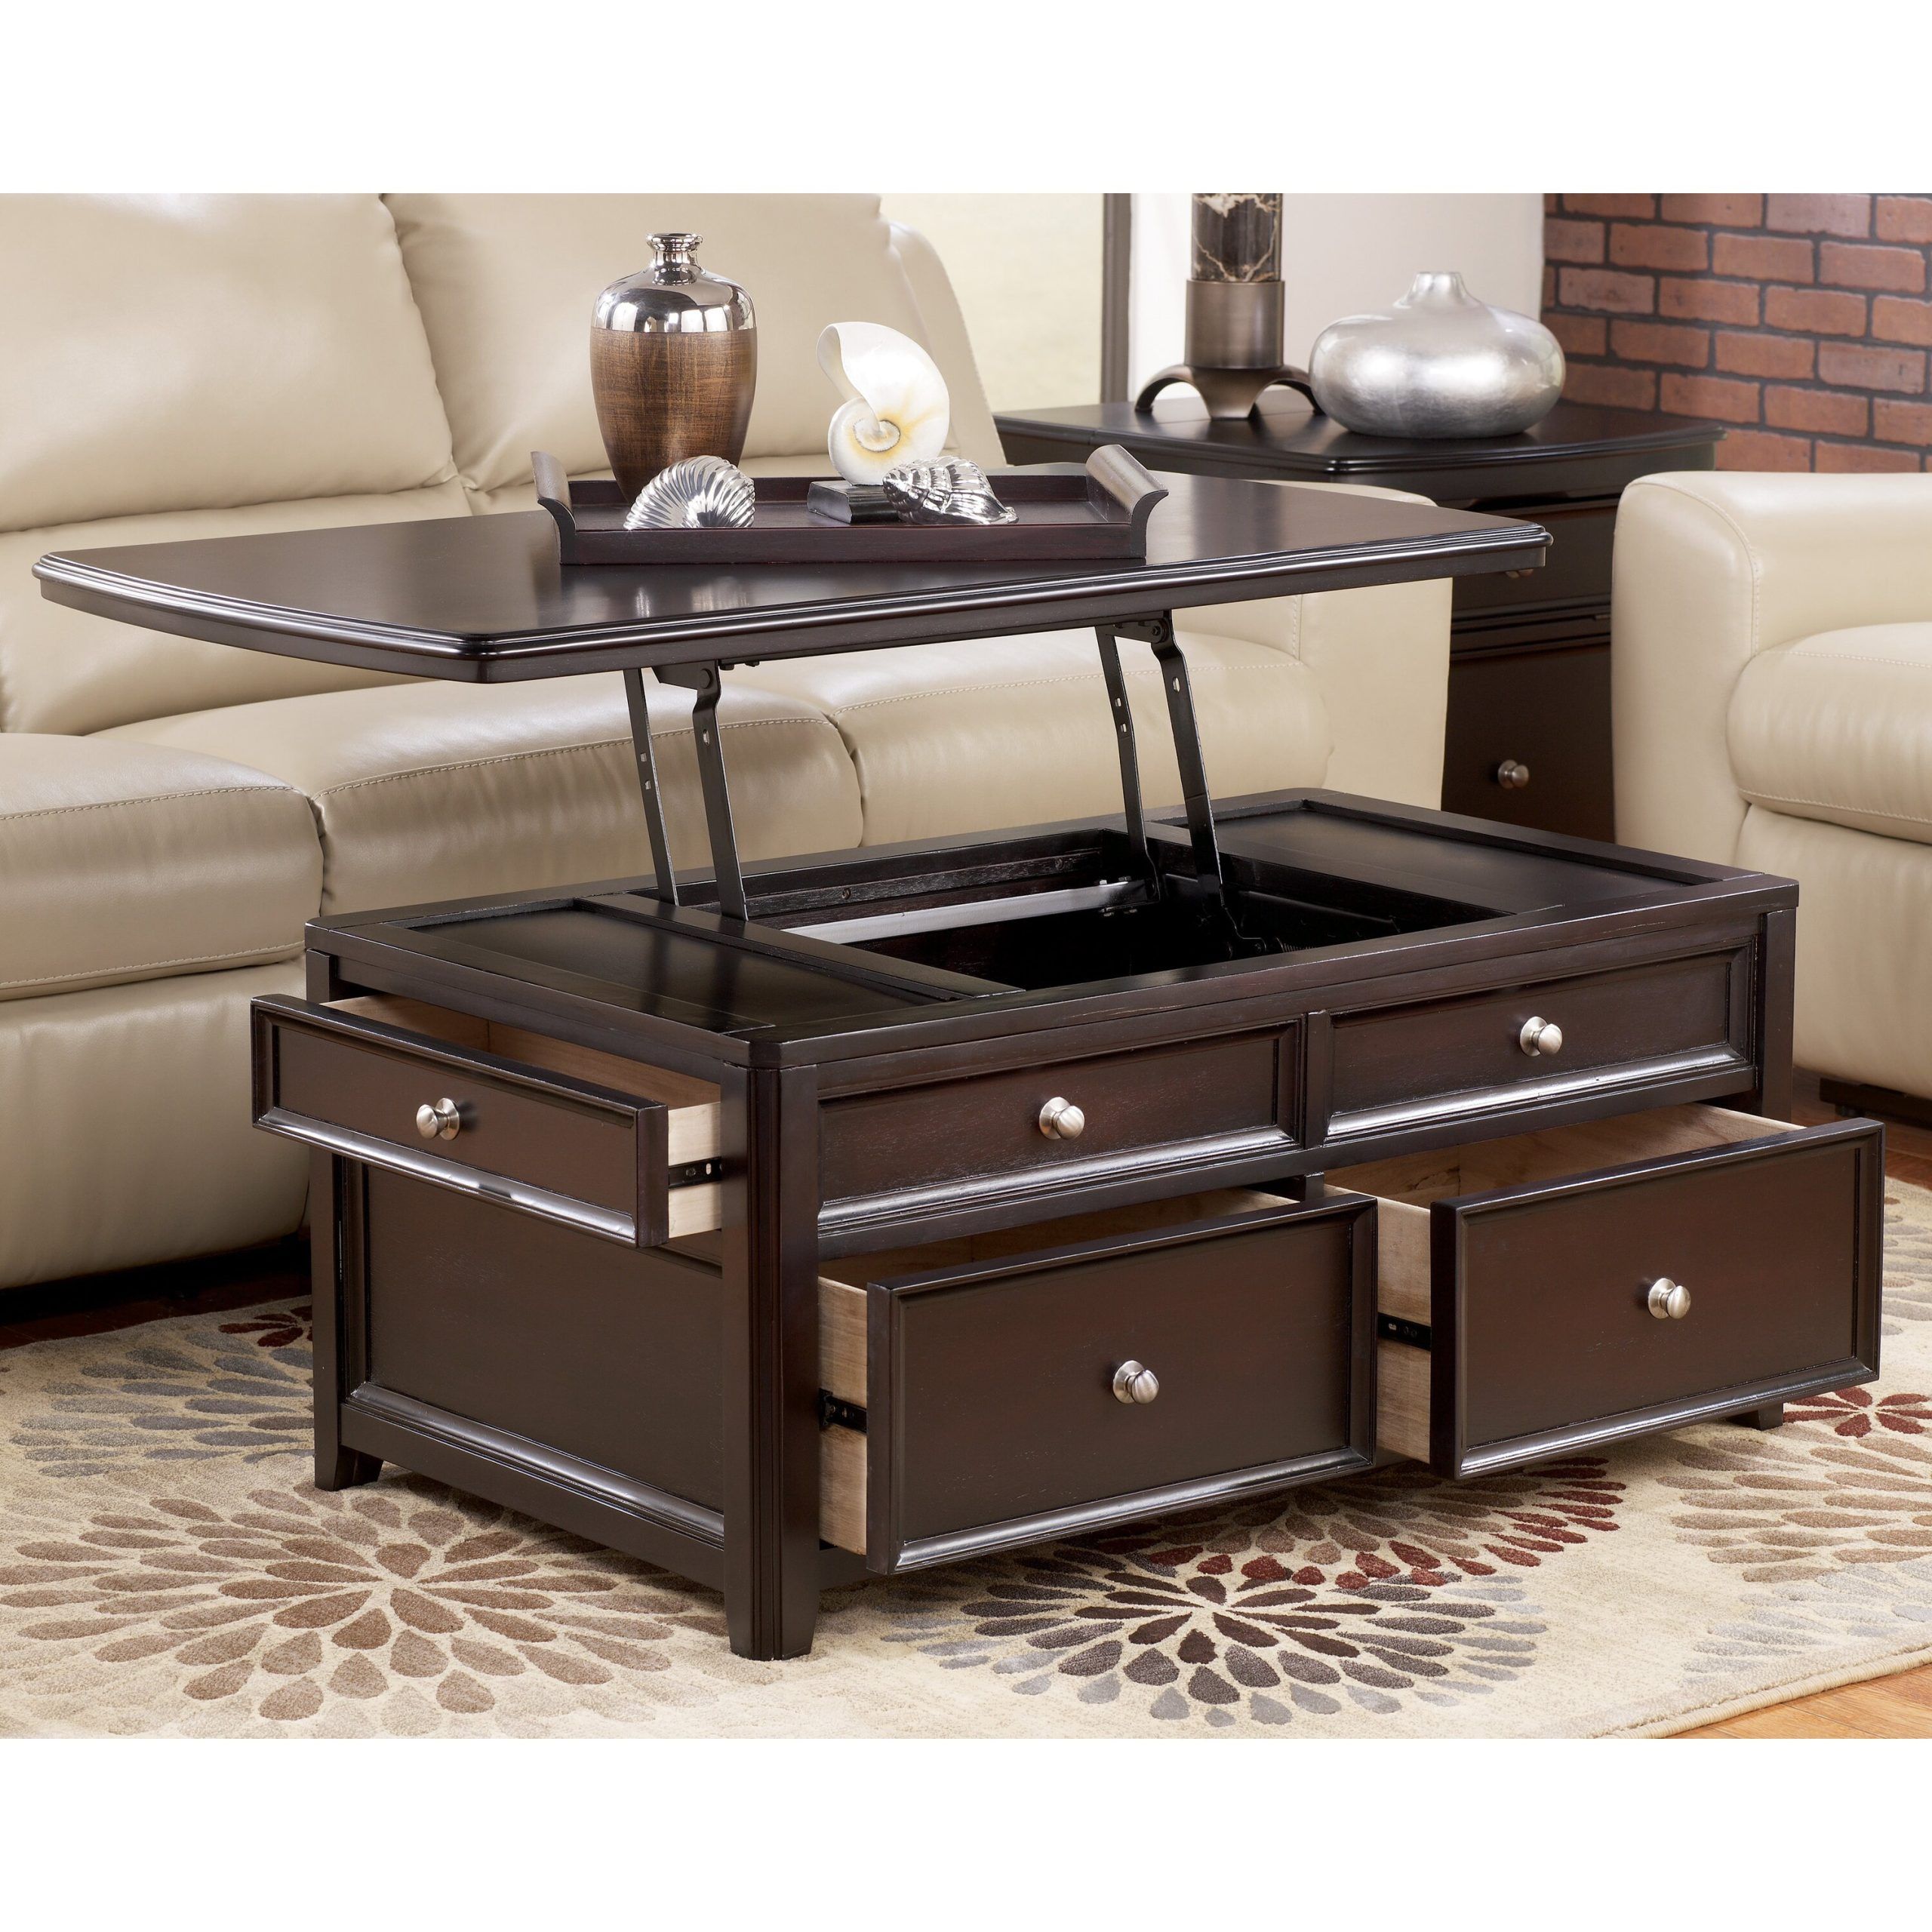 Wayfair Uk Lift Top Coffee Table / Ivy Bronx Lucier Lift Top Coffee Within Lift Top Coffee Tables With Storage (Gallery 19 of 20)